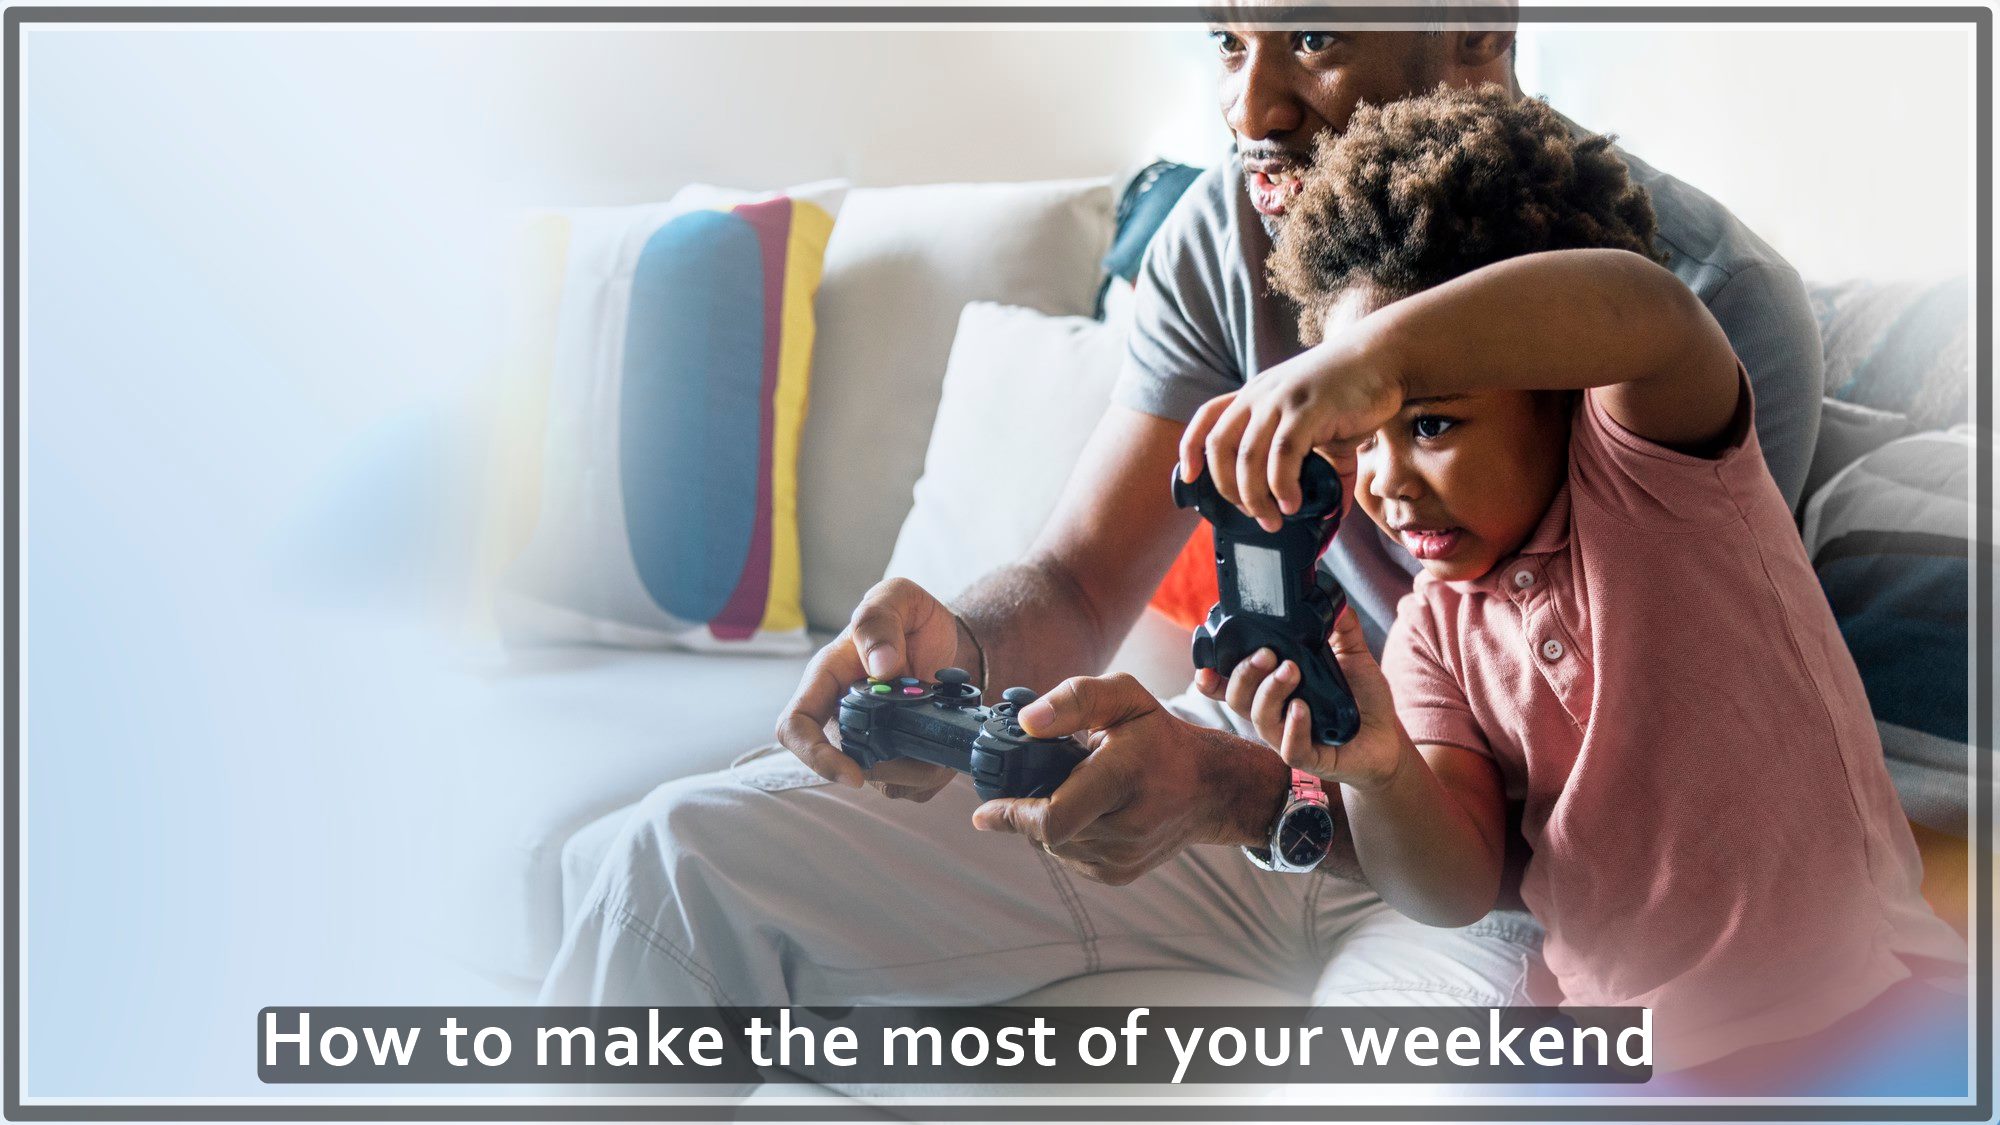 How to make the most of your weekend